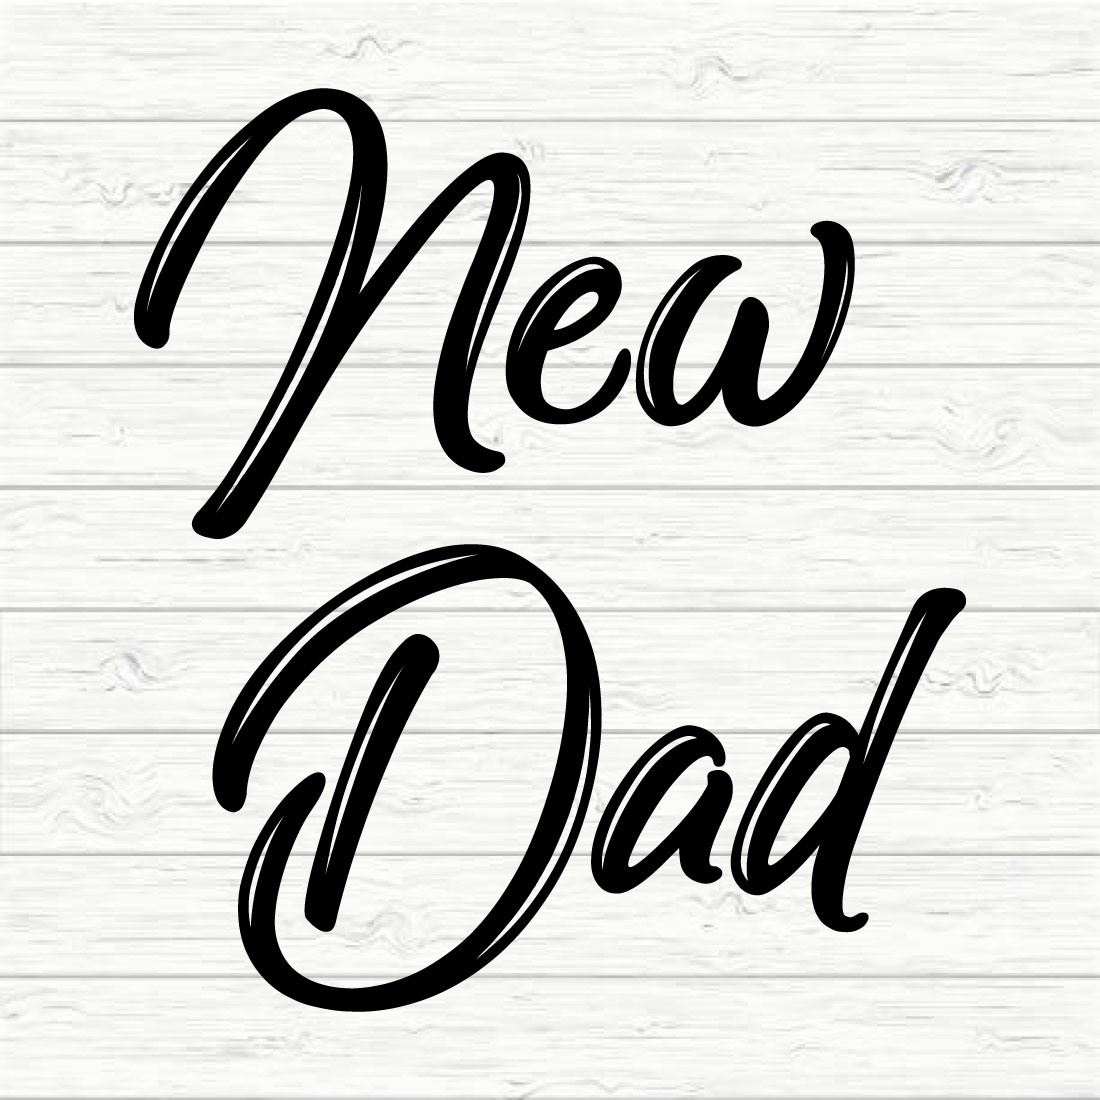 New Dad cover image.